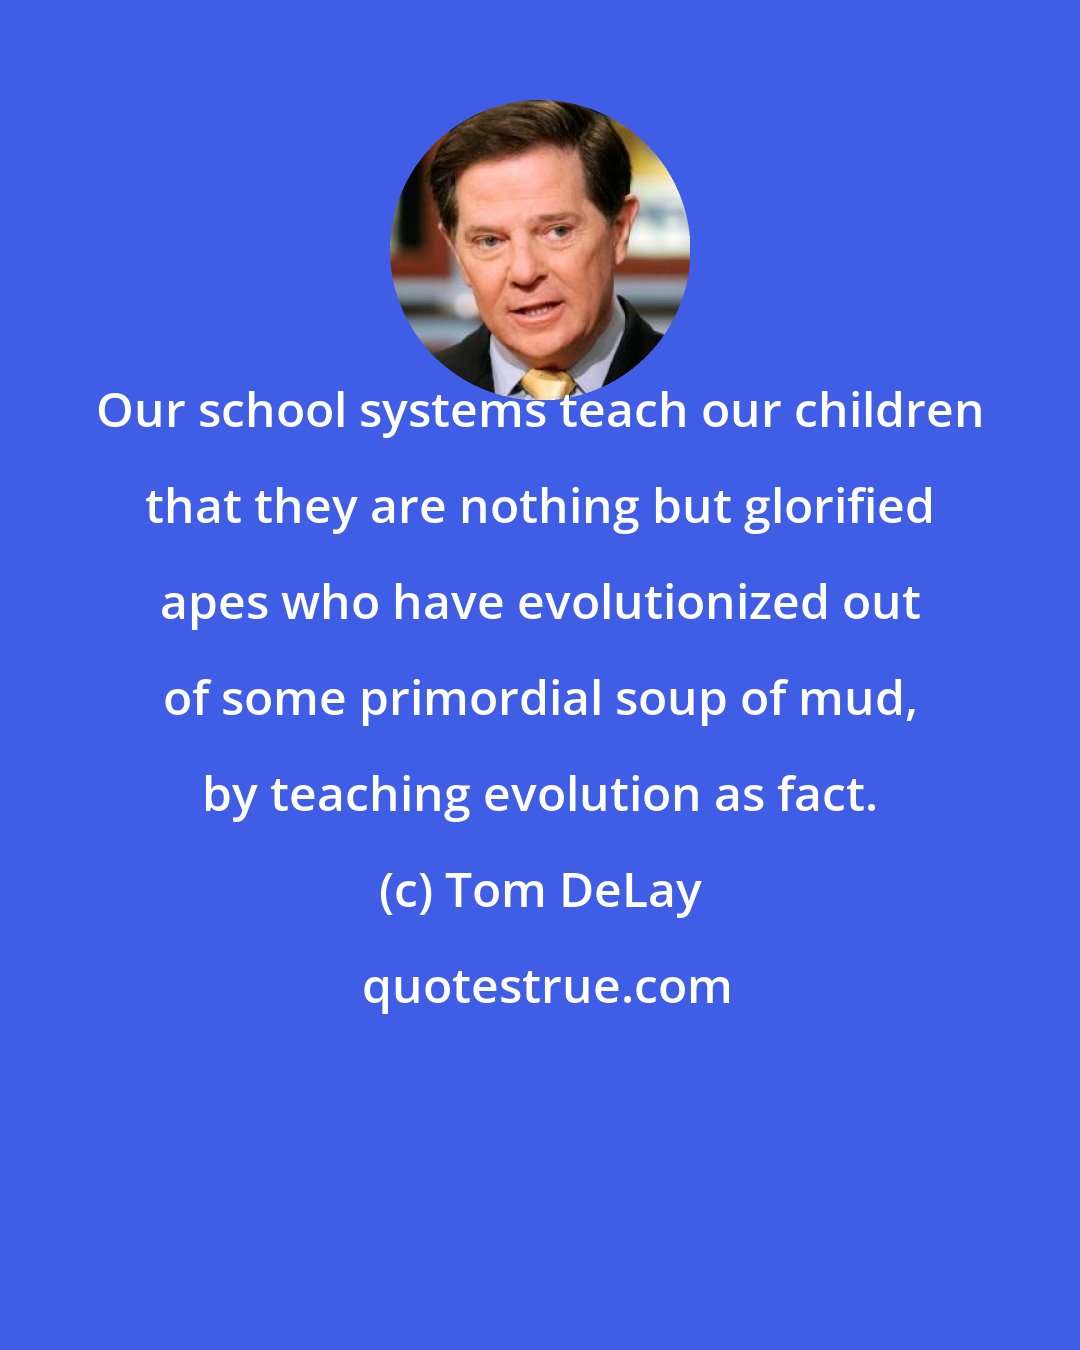 Tom DeLay: Our school systems teach our children that they are nothing but glorified apes who have evolutionized out of some primordial soup of mud, by teaching evolution as fact.